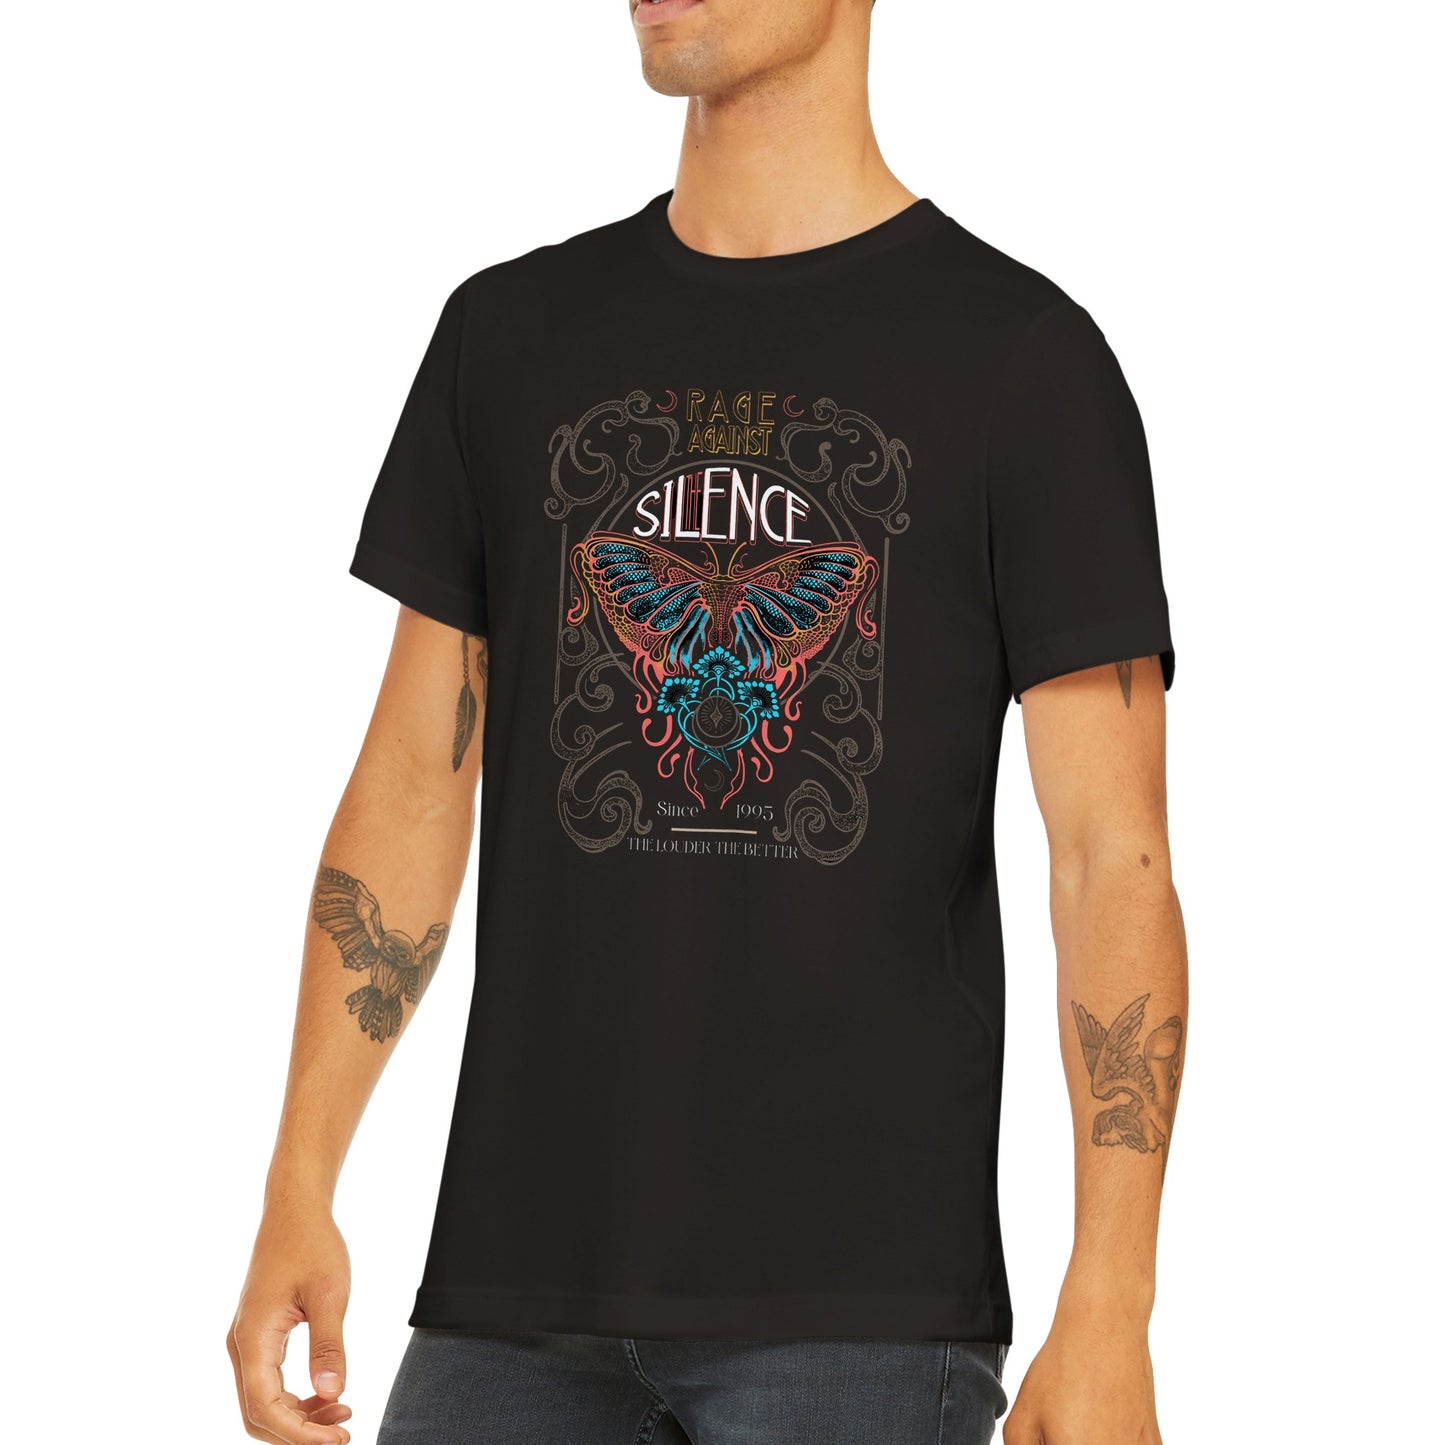 Rage Against the Silence T-shirt